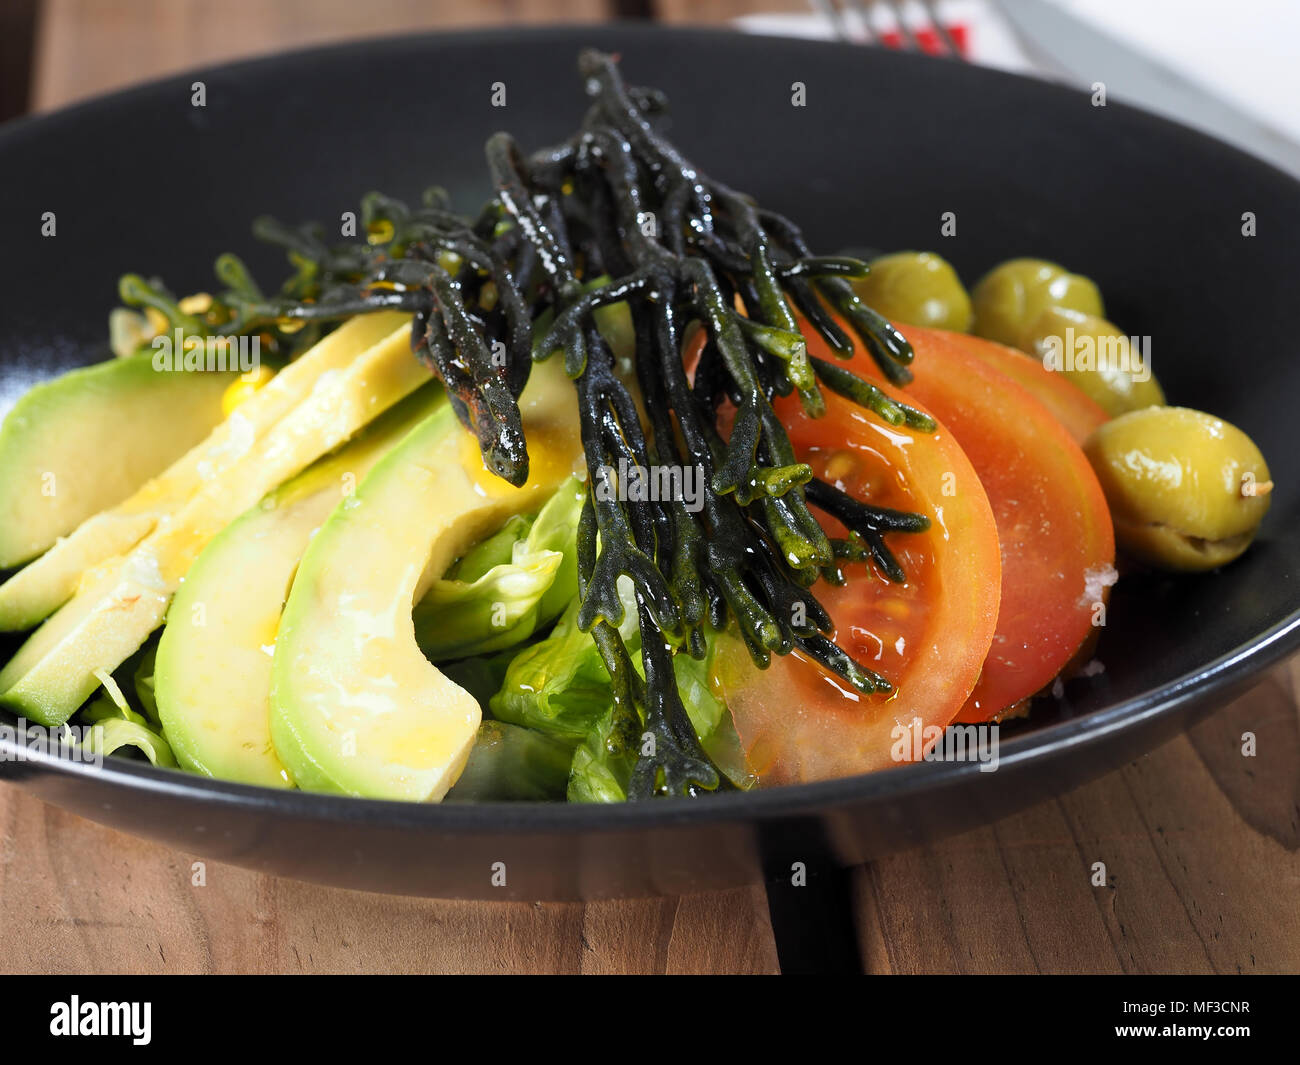 Codium – Velvet horn – Spongeweed in Salad with avocado.  Edible green seaweed in the family Codiaceae. Binomial name: Codium tomentosum. There are ab Stock Photo